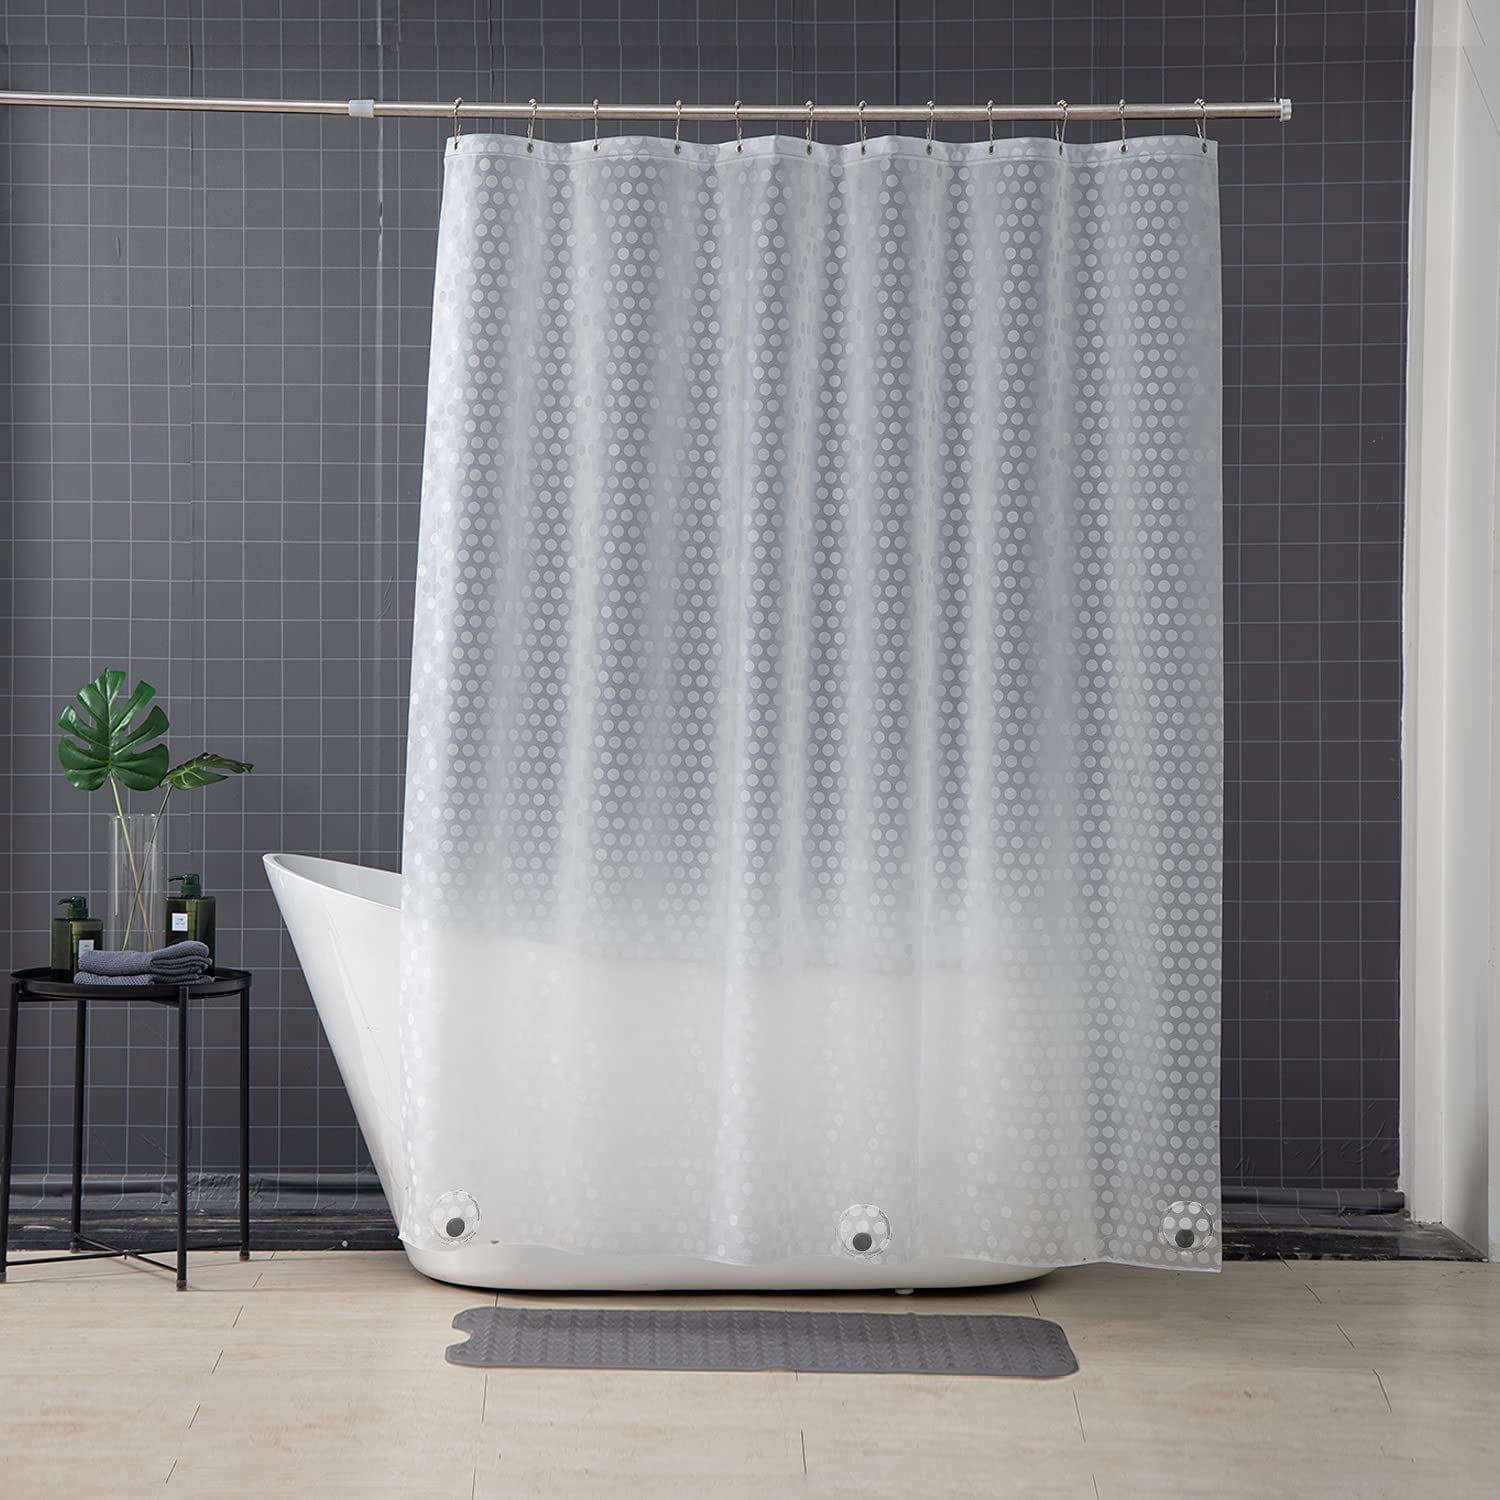 Details about   Circle Hook Bathroom Curtain Waterproof Shower Curtains For Bathroom Polyester 